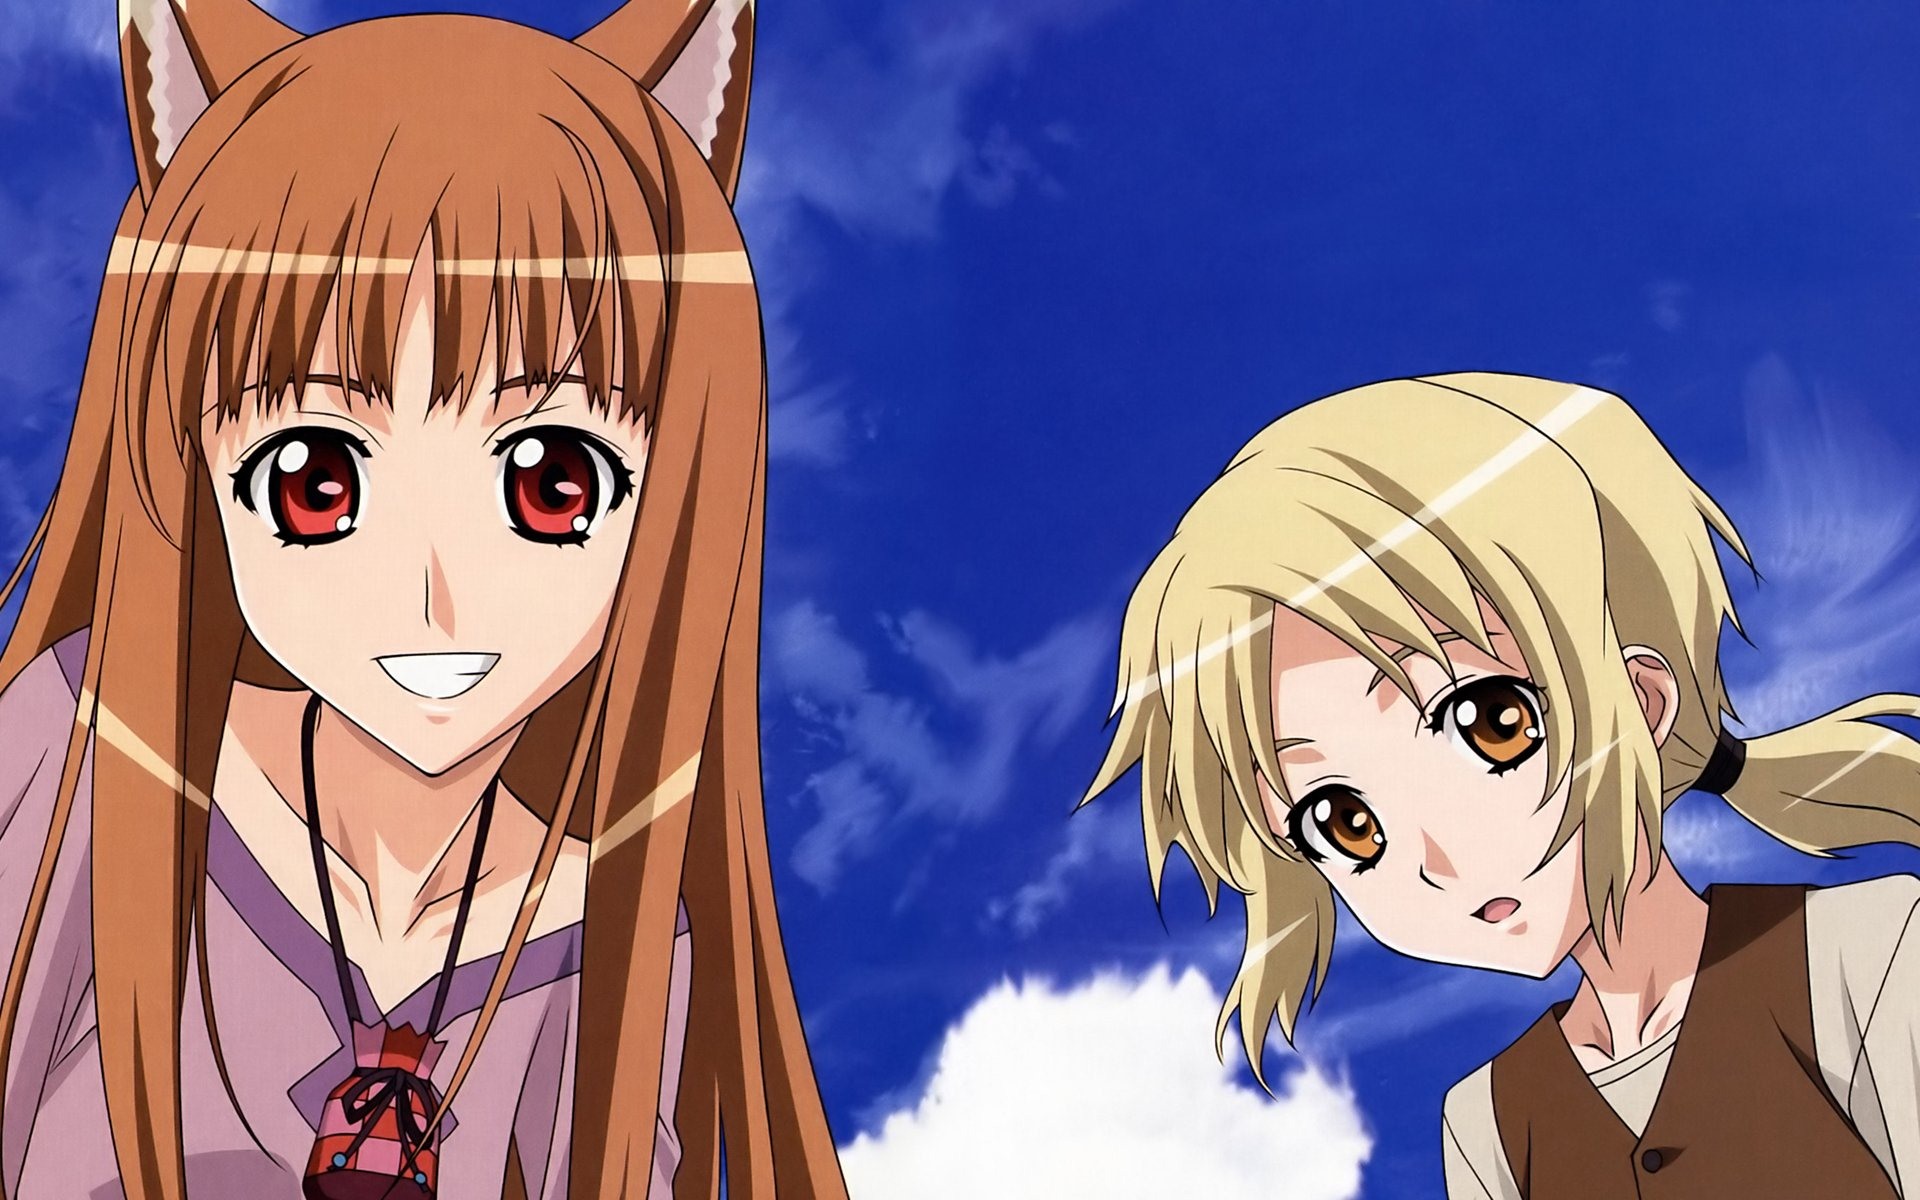 Spice and Wolf HD wallpapers #25 - 1920x1200